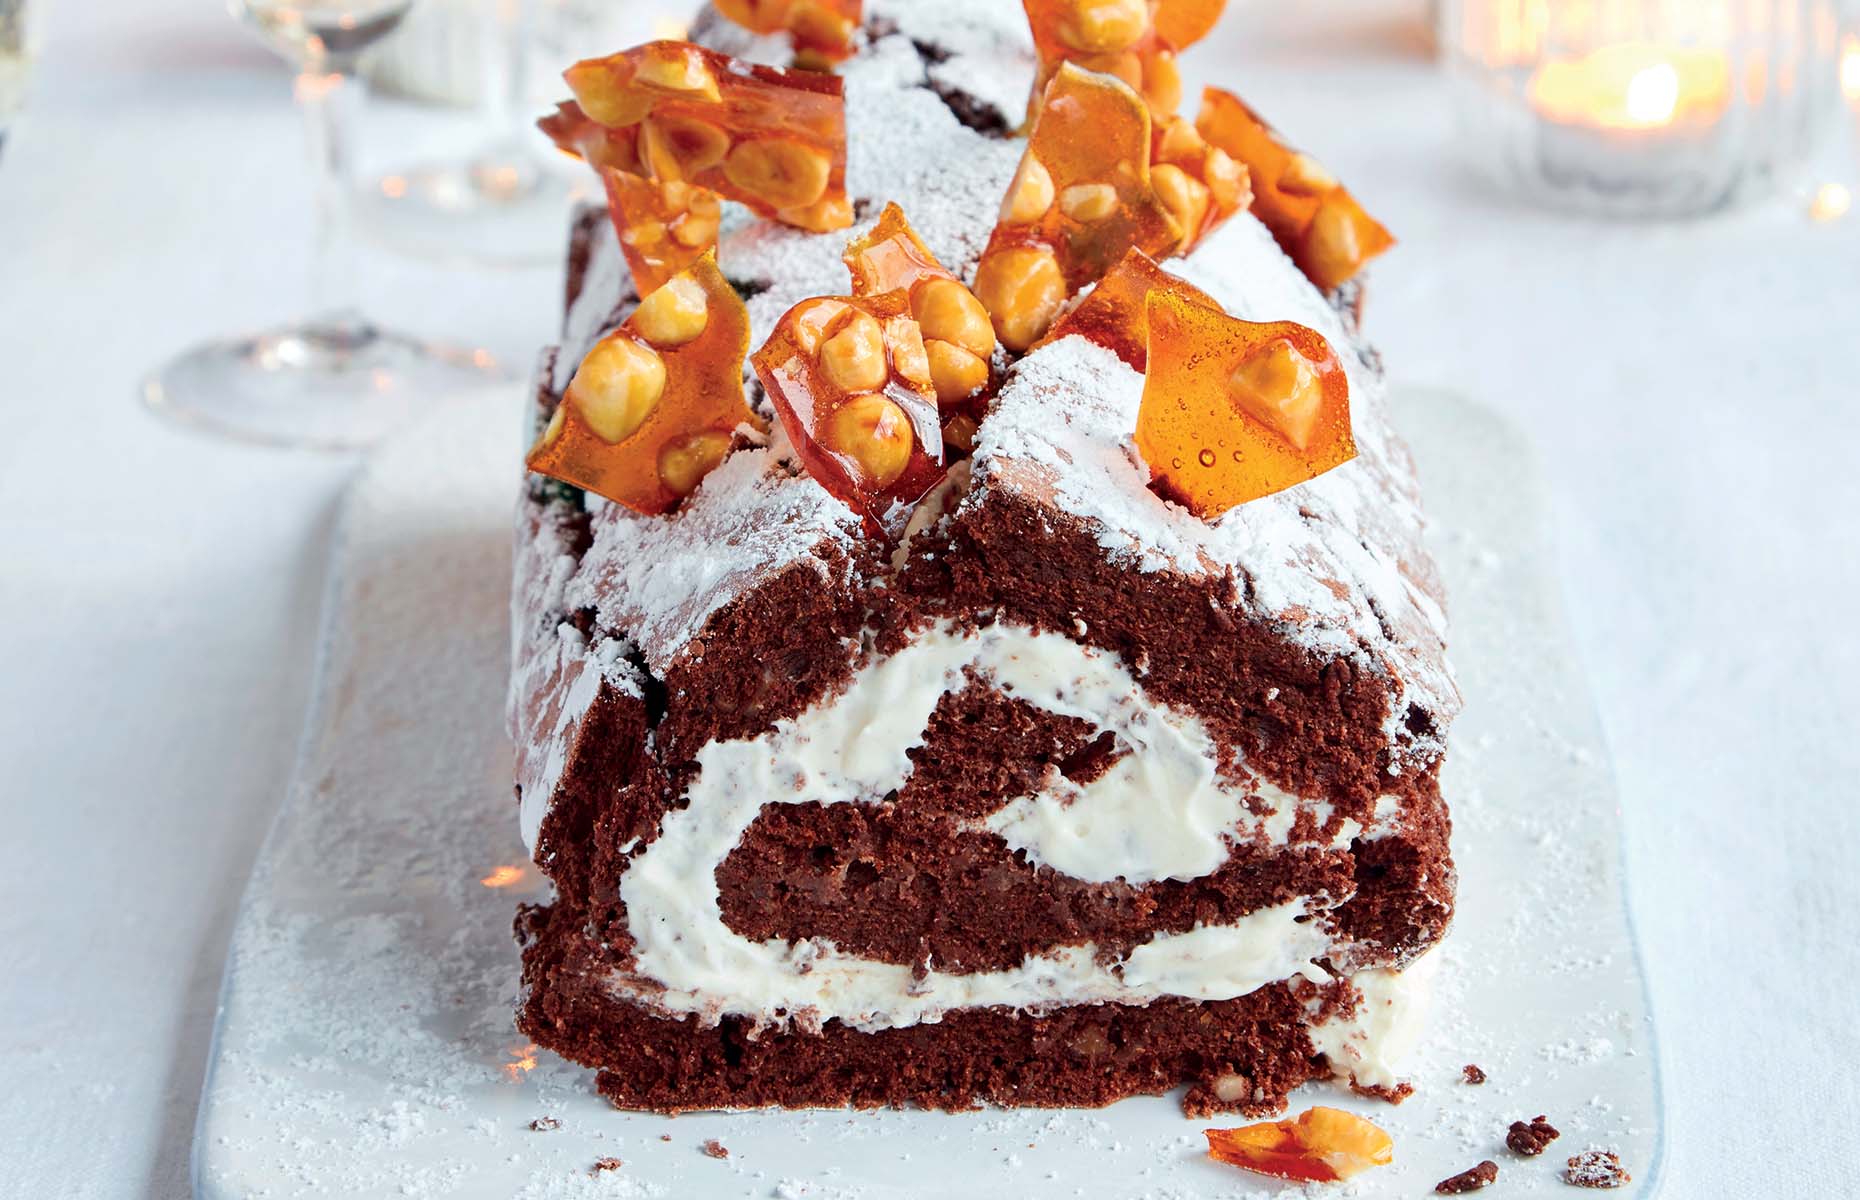 Chocolate and hazelnut boozy roulade (Image: Mary Berry Cooks Up a Feast/DK)